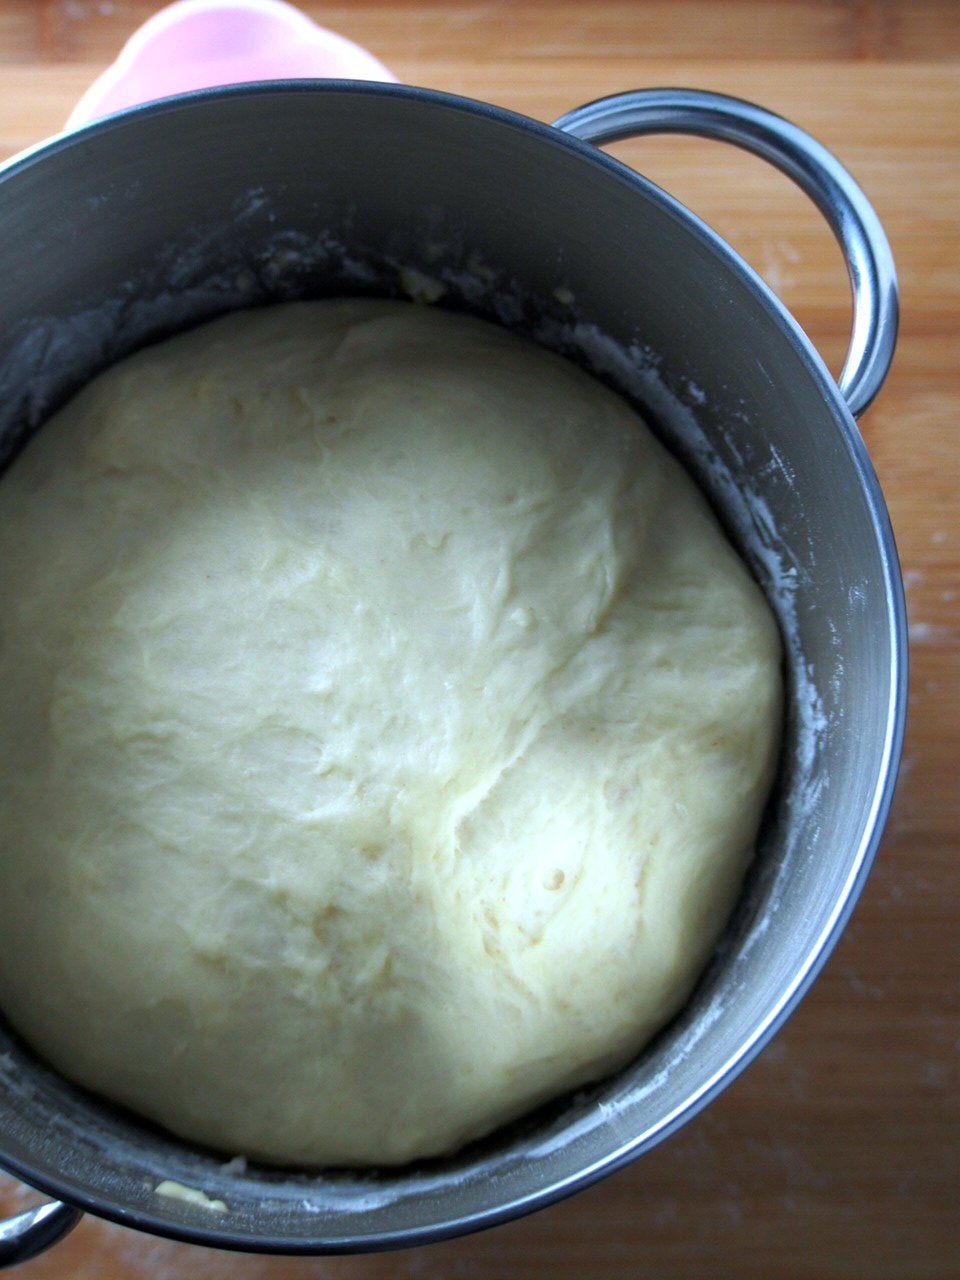 The dough for honey buns after rising.